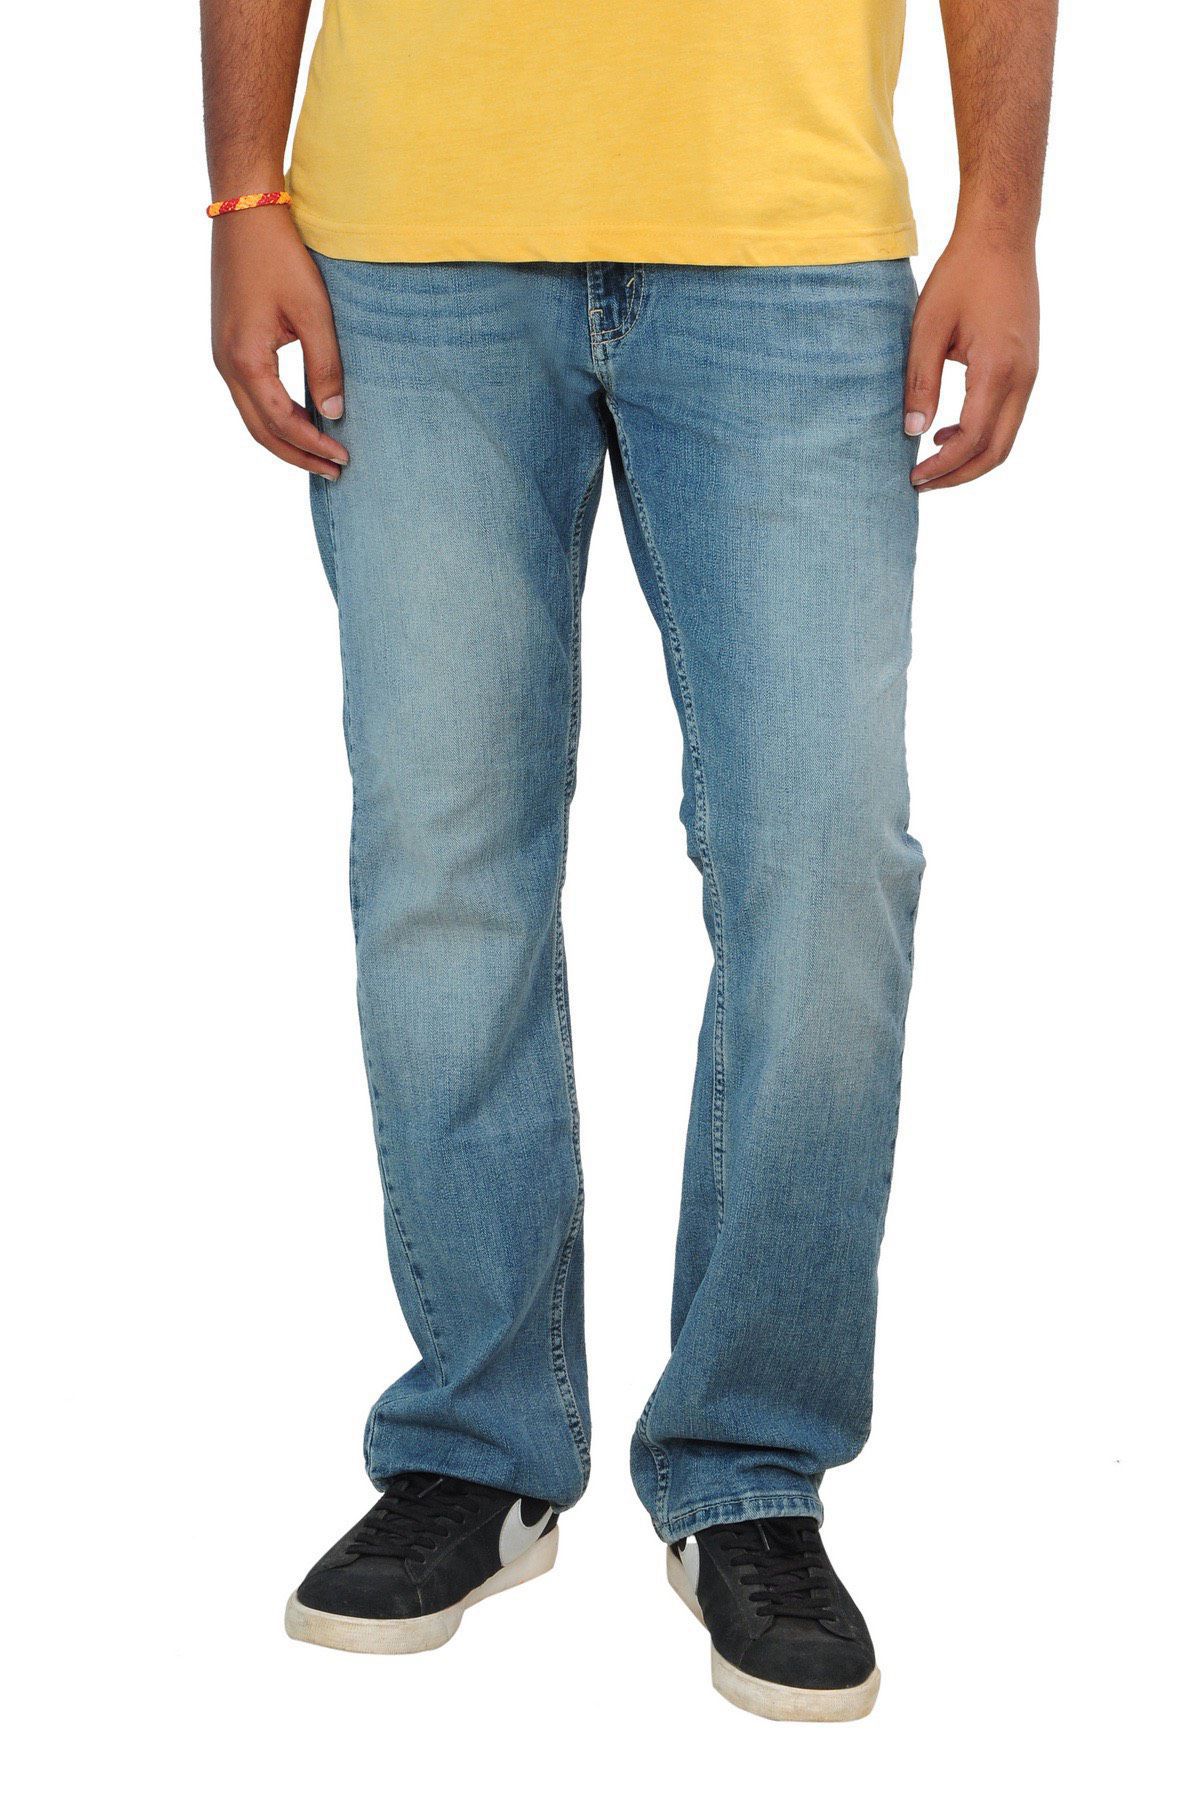 snapdeal levis jeans